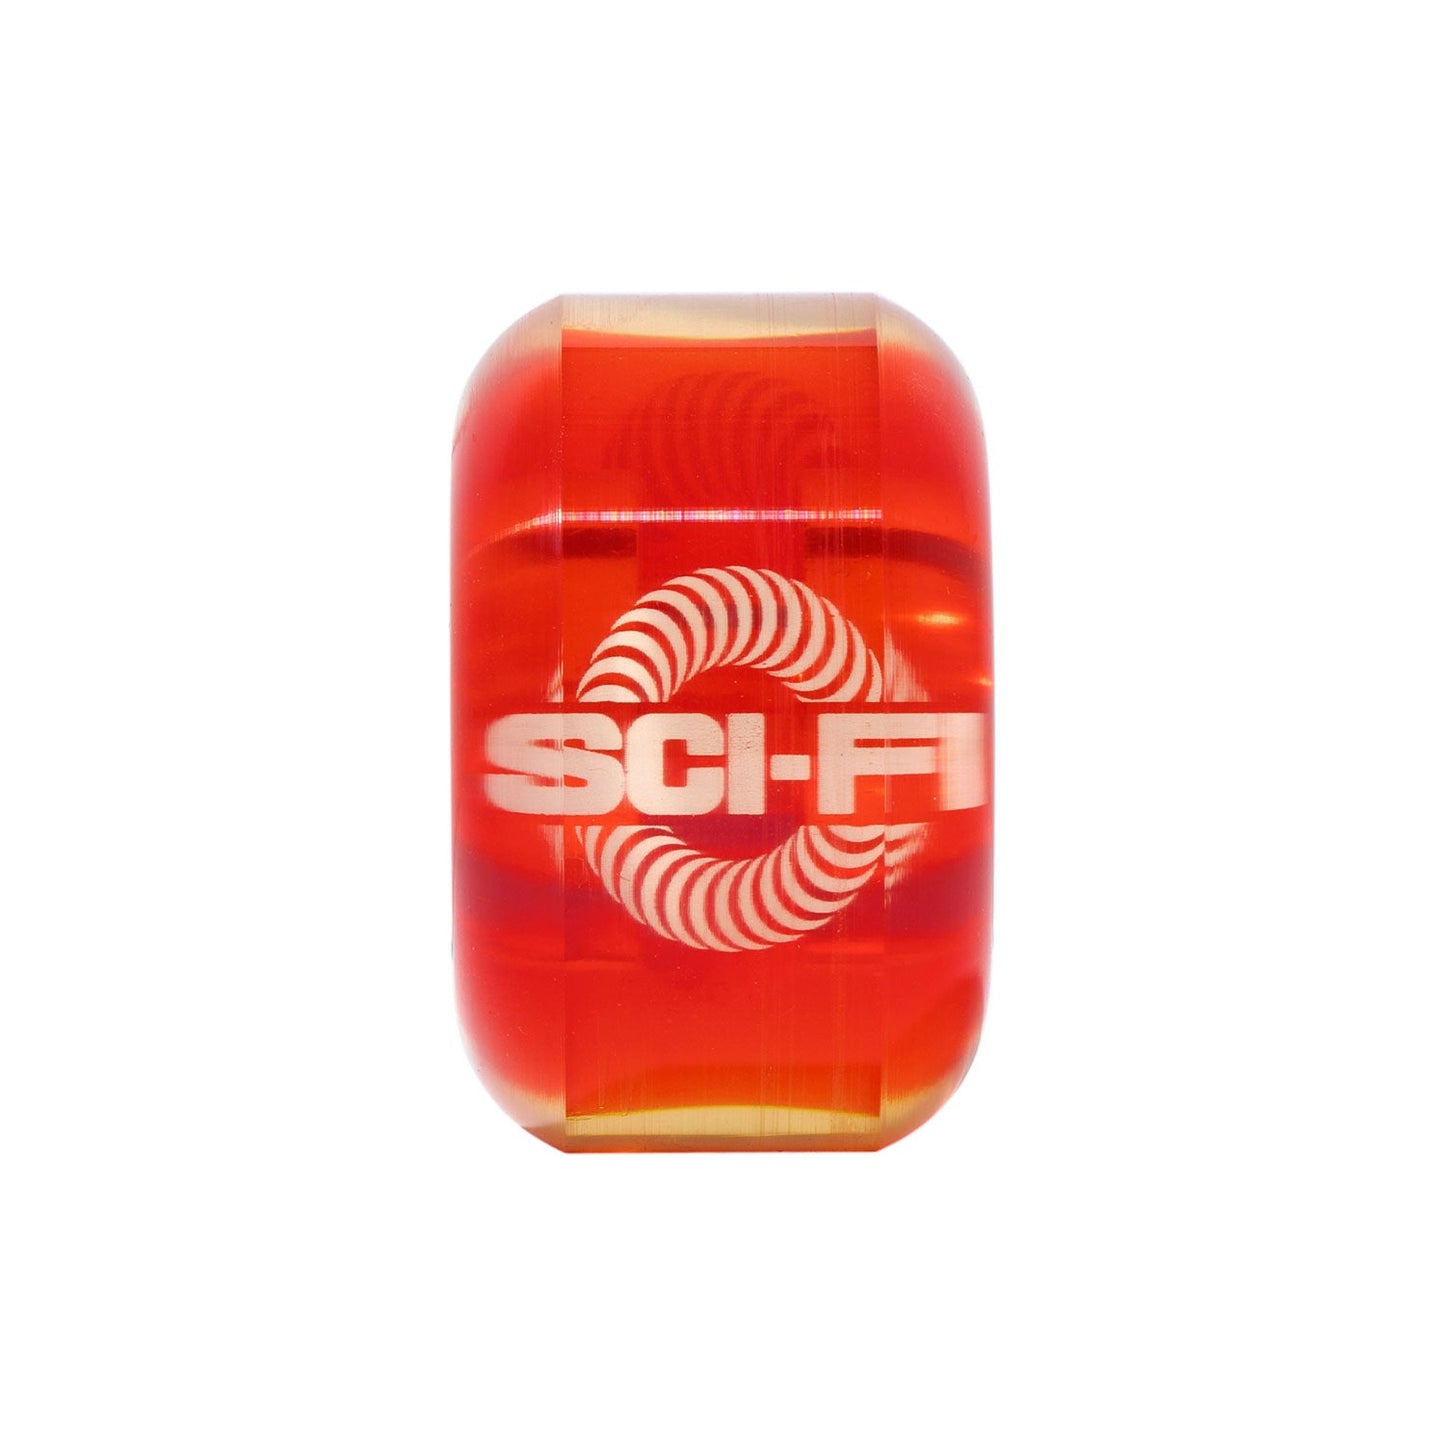 Spitfire Sci-Fi Sapphires Wheels, clear / red (58mm) - Tiki Room Skateboards - 2